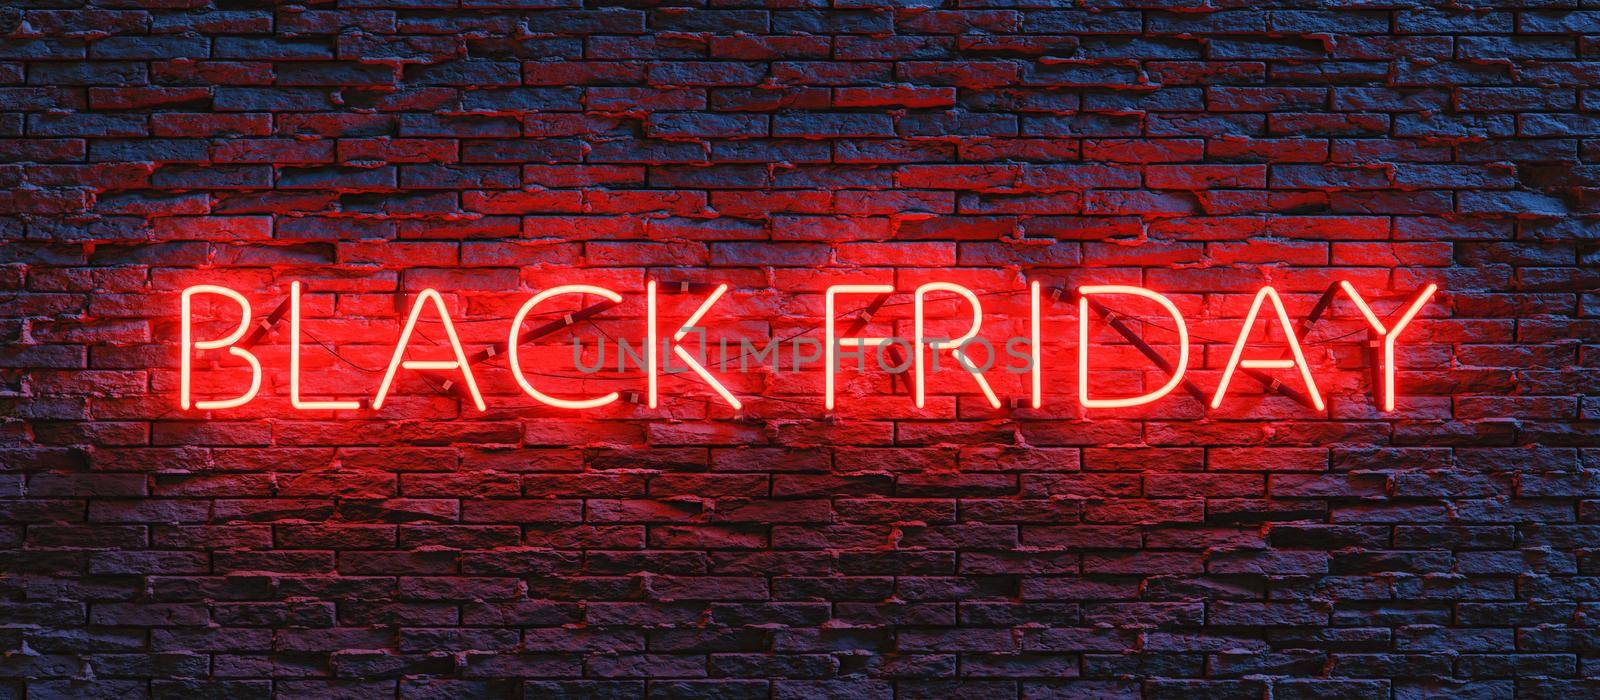 3D rendering of illuminated red neon Black Friday sign hanging on gray brick wall